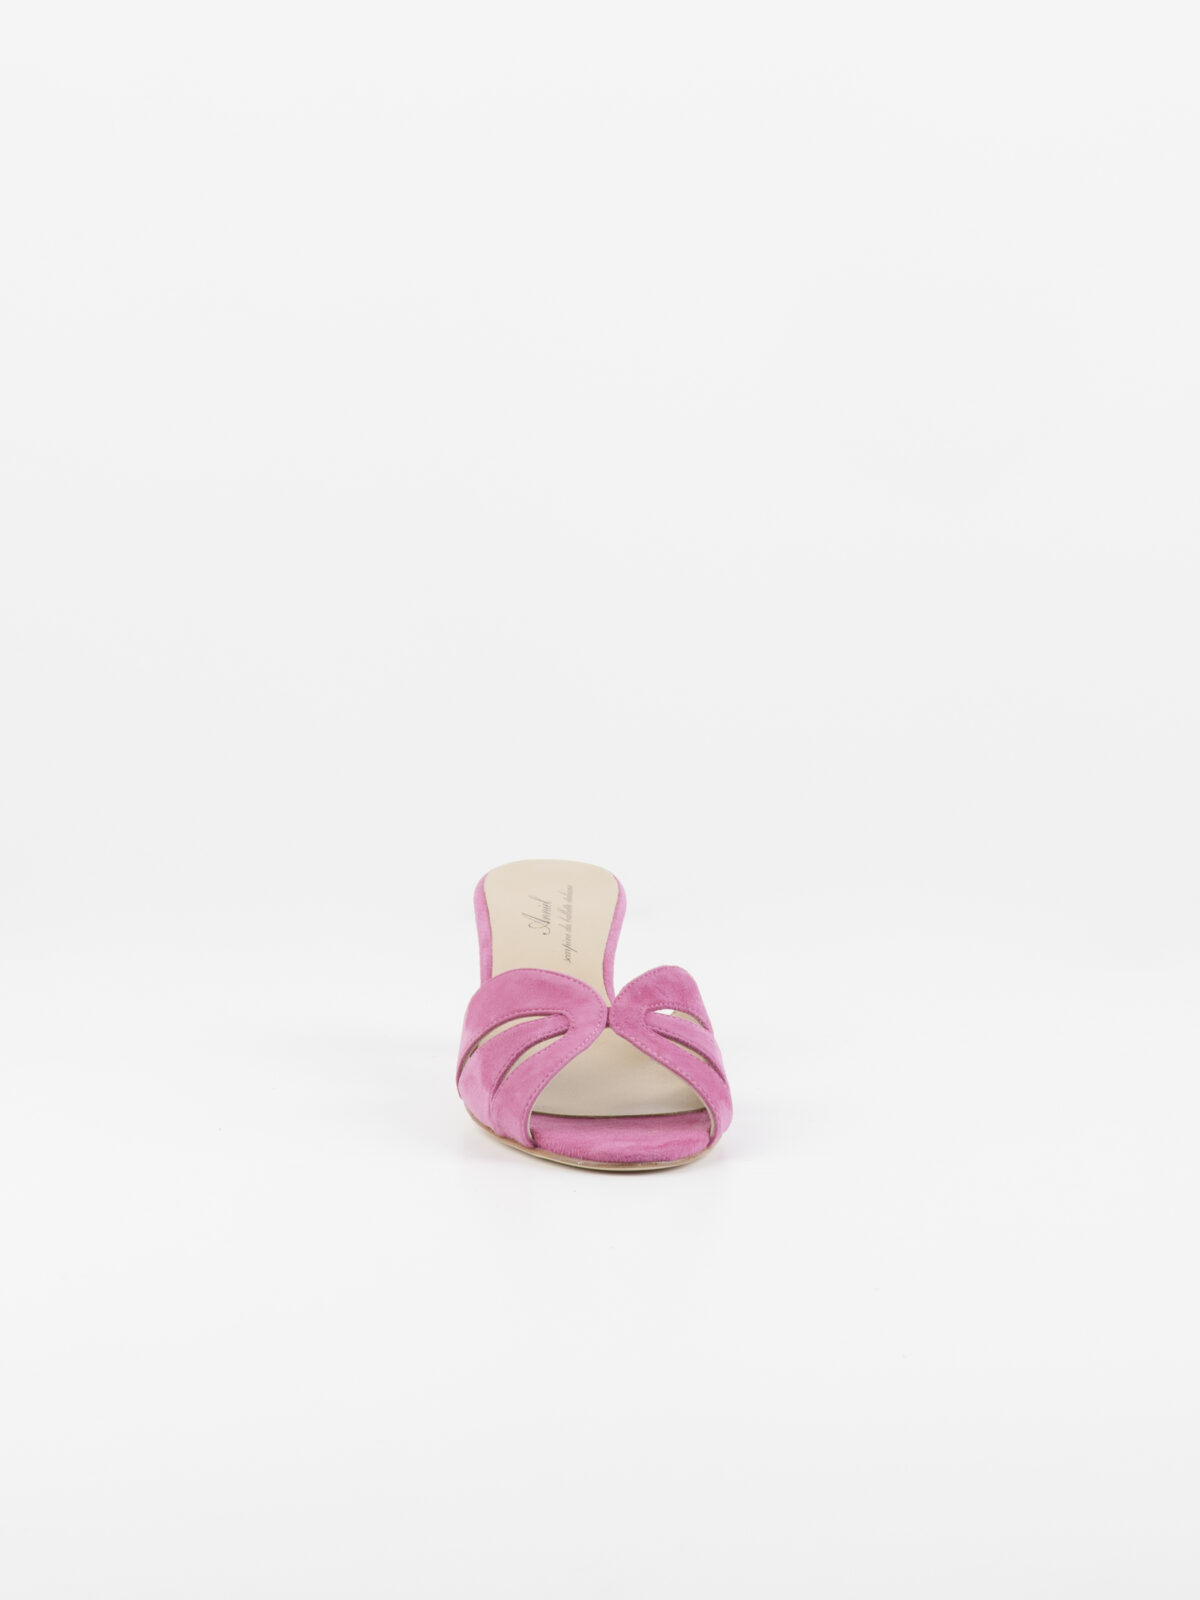 cams-pink-suede-leather-mules-sandals-anniel-handmade-matchboxtahens